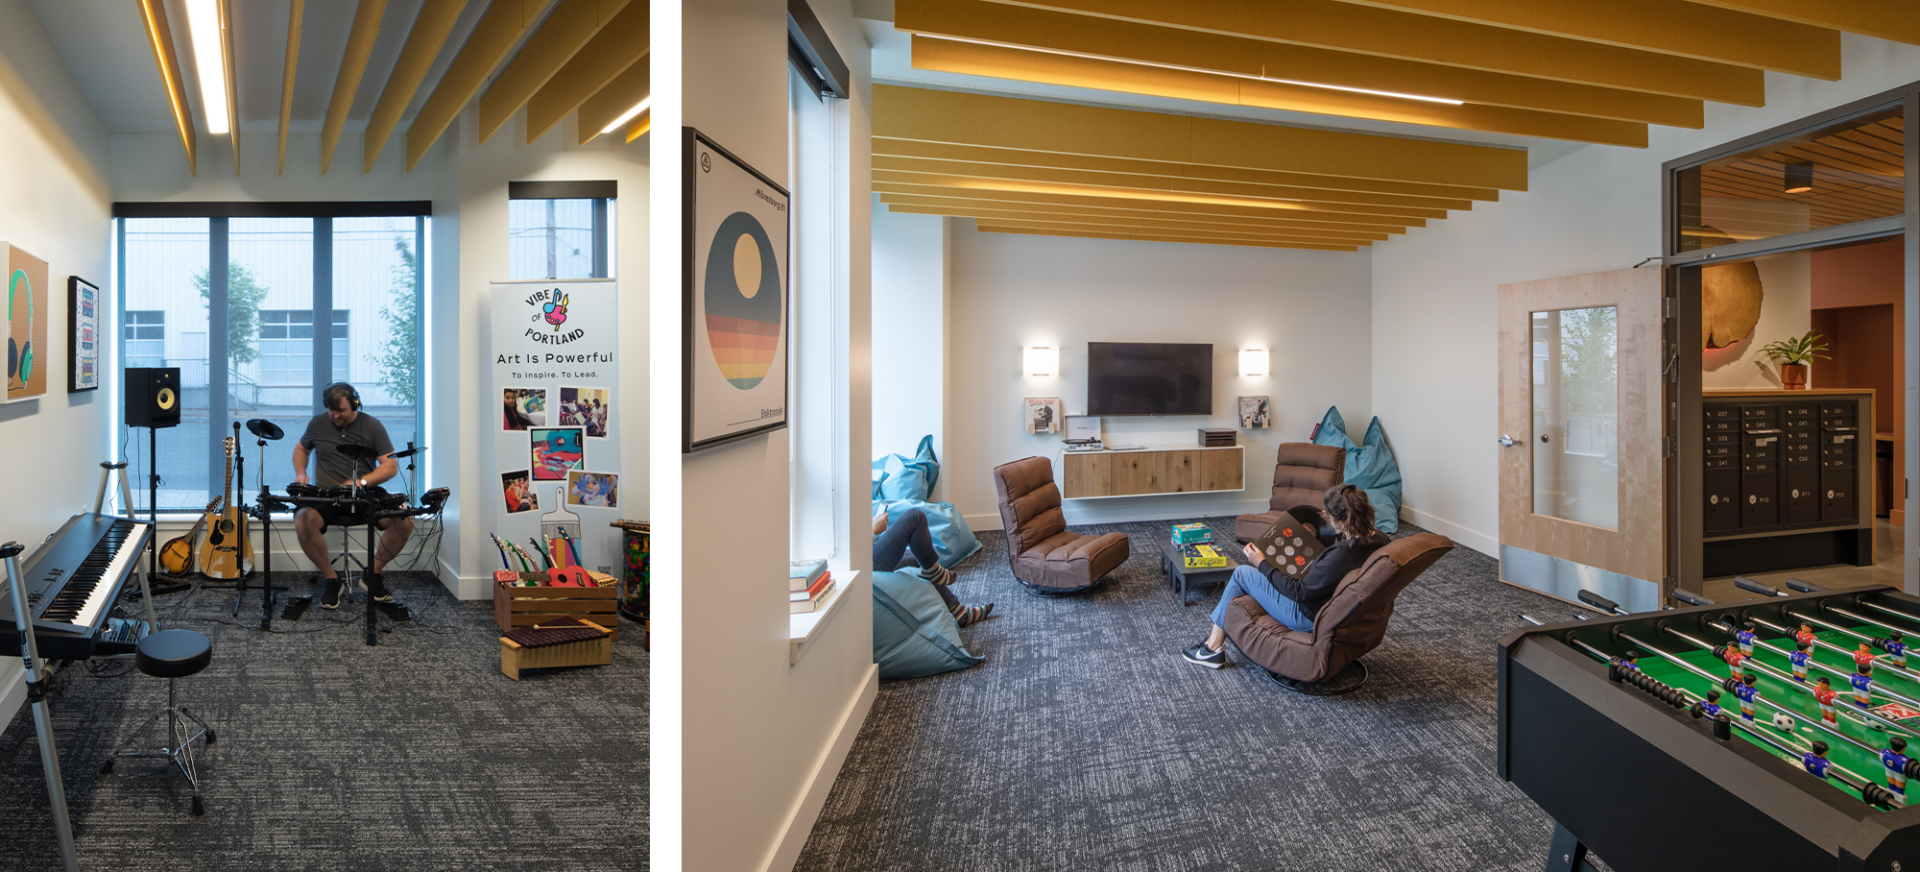 Two side by side photos. The left photo is of someone playing drums in a music room. The photo on the right has two people sitting in bean bag chairs reading.